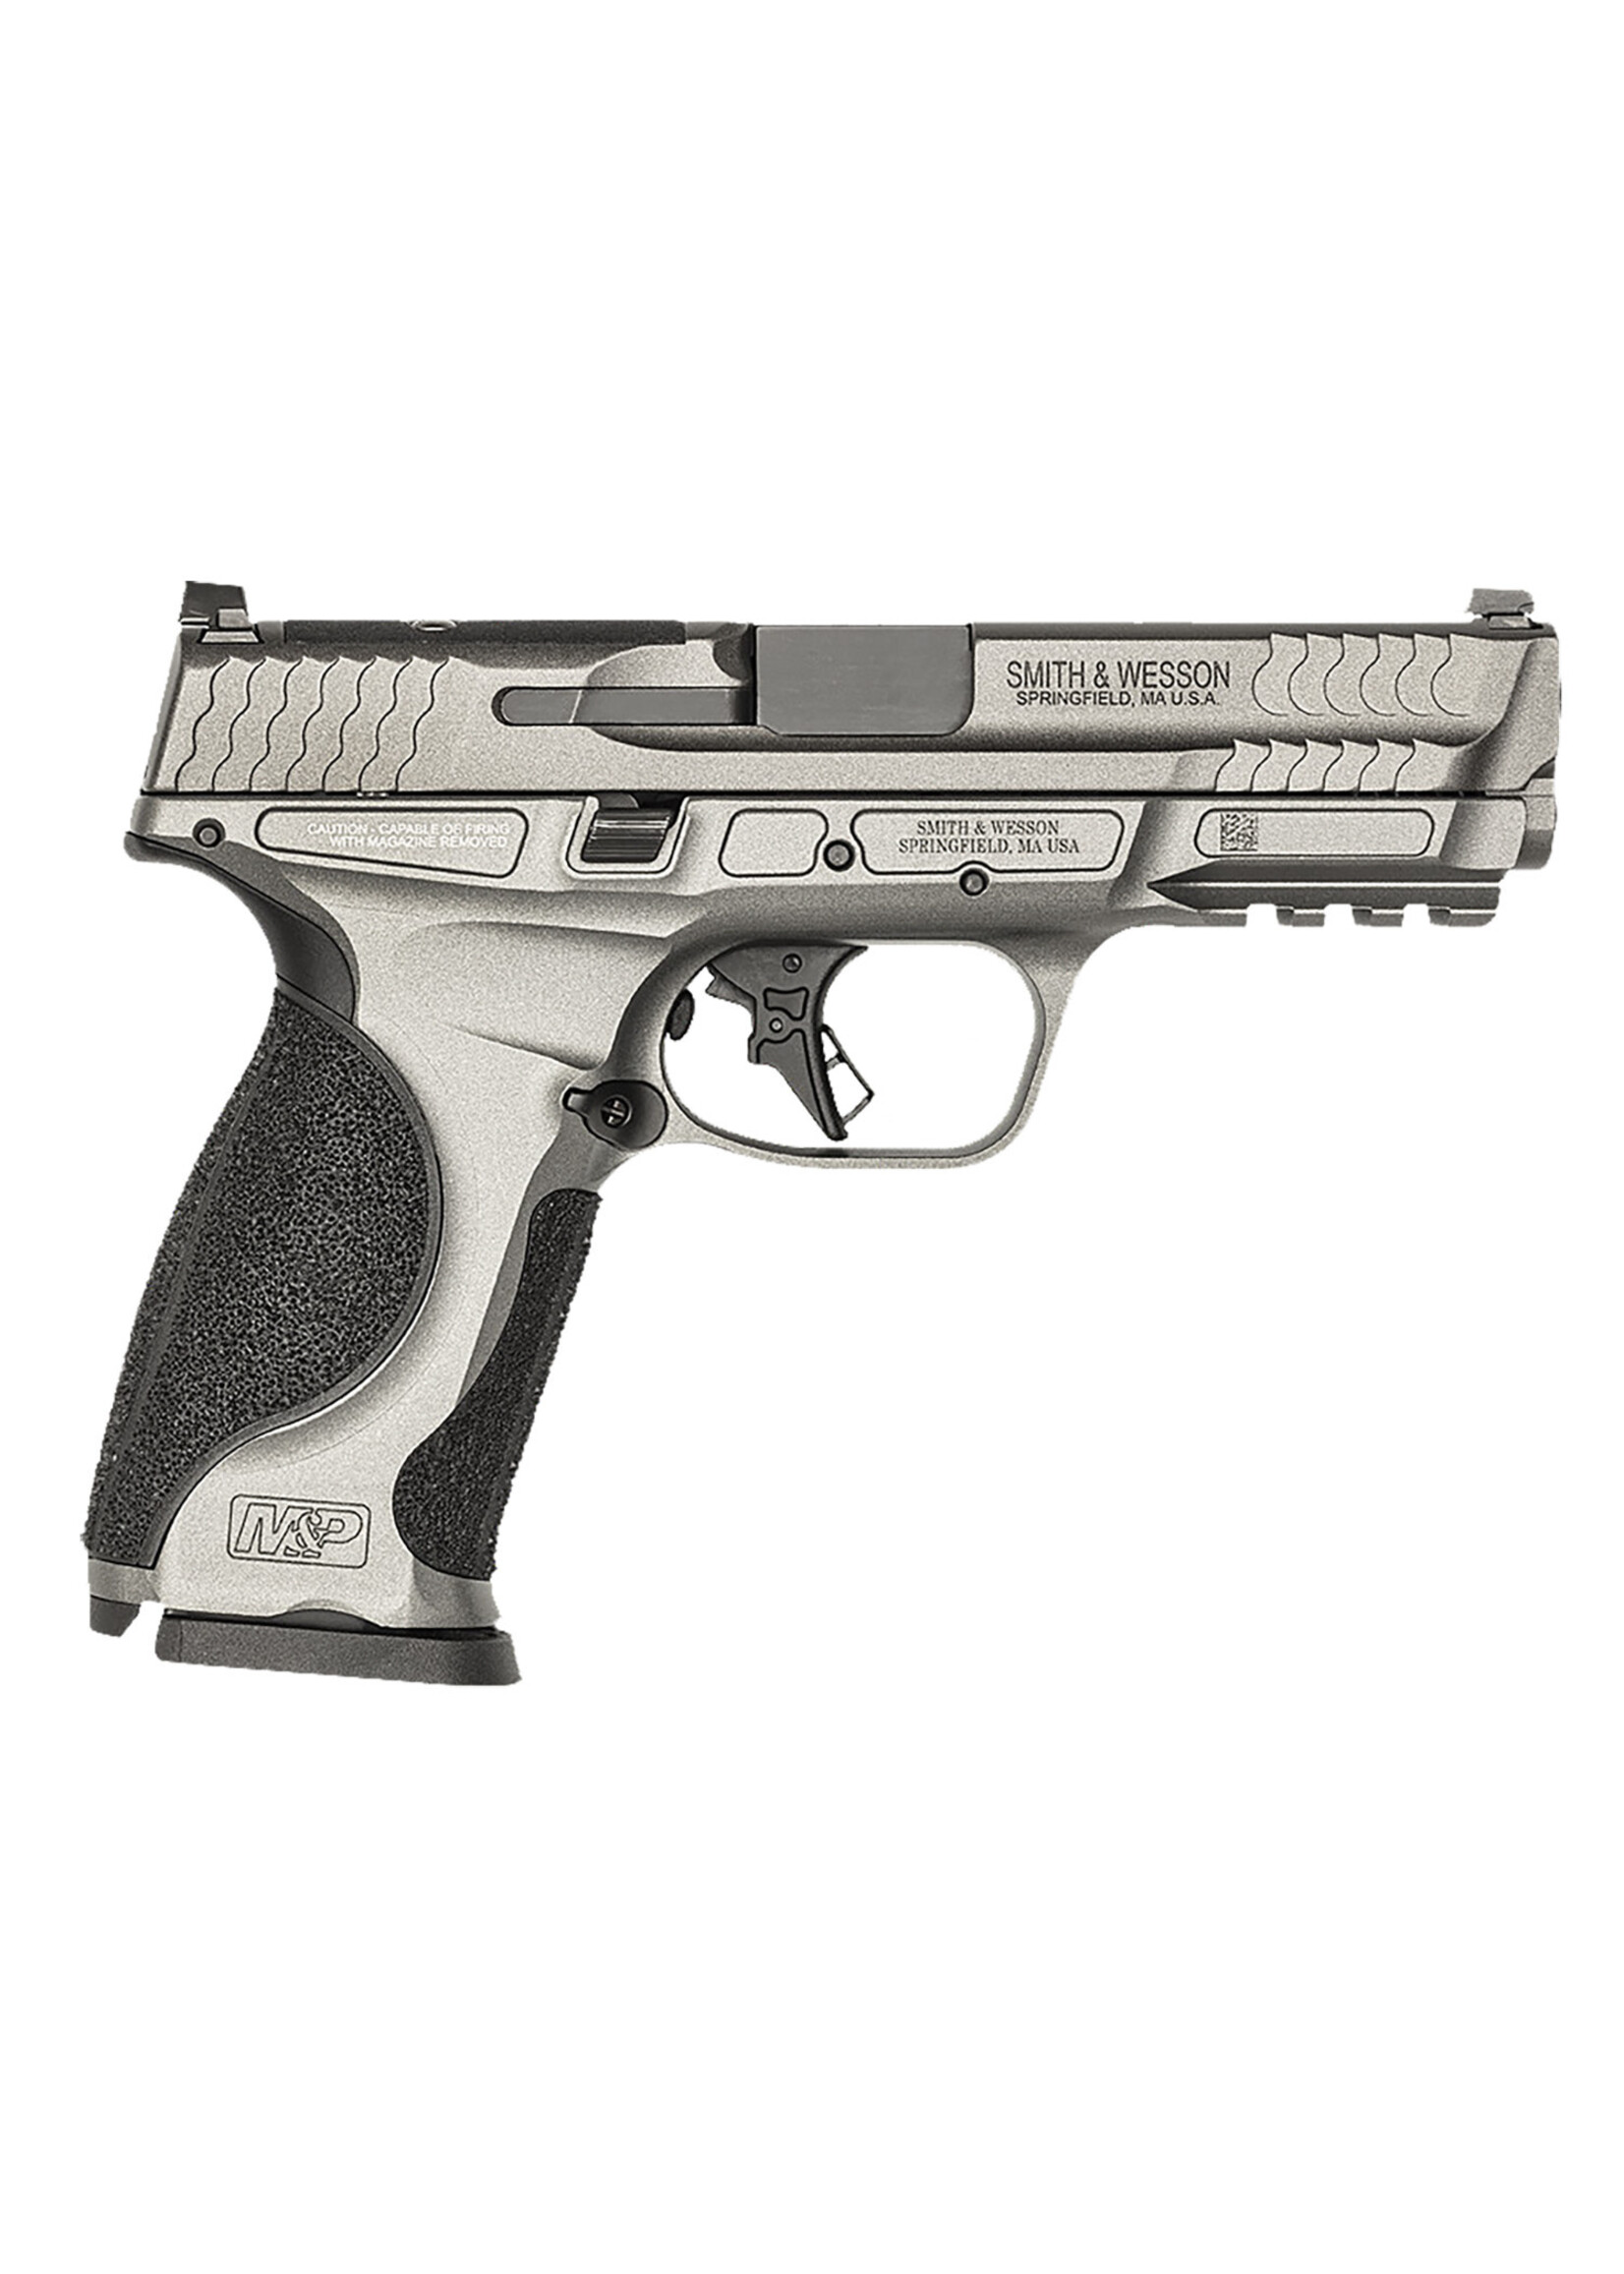 Smith and Wesson (S&W) Smith & Wesson 13971 M&P M2.0 Metal Optic Bundle Full Size Frame 9mm Luger 17+1, 4.25" Black Armornite Stainless Steel Barrel, Tungsten Gray Cerakote Optic Cut/Serrated Stainless Steel Slide, Tungsten Gray Cerakote Aluminum Fram